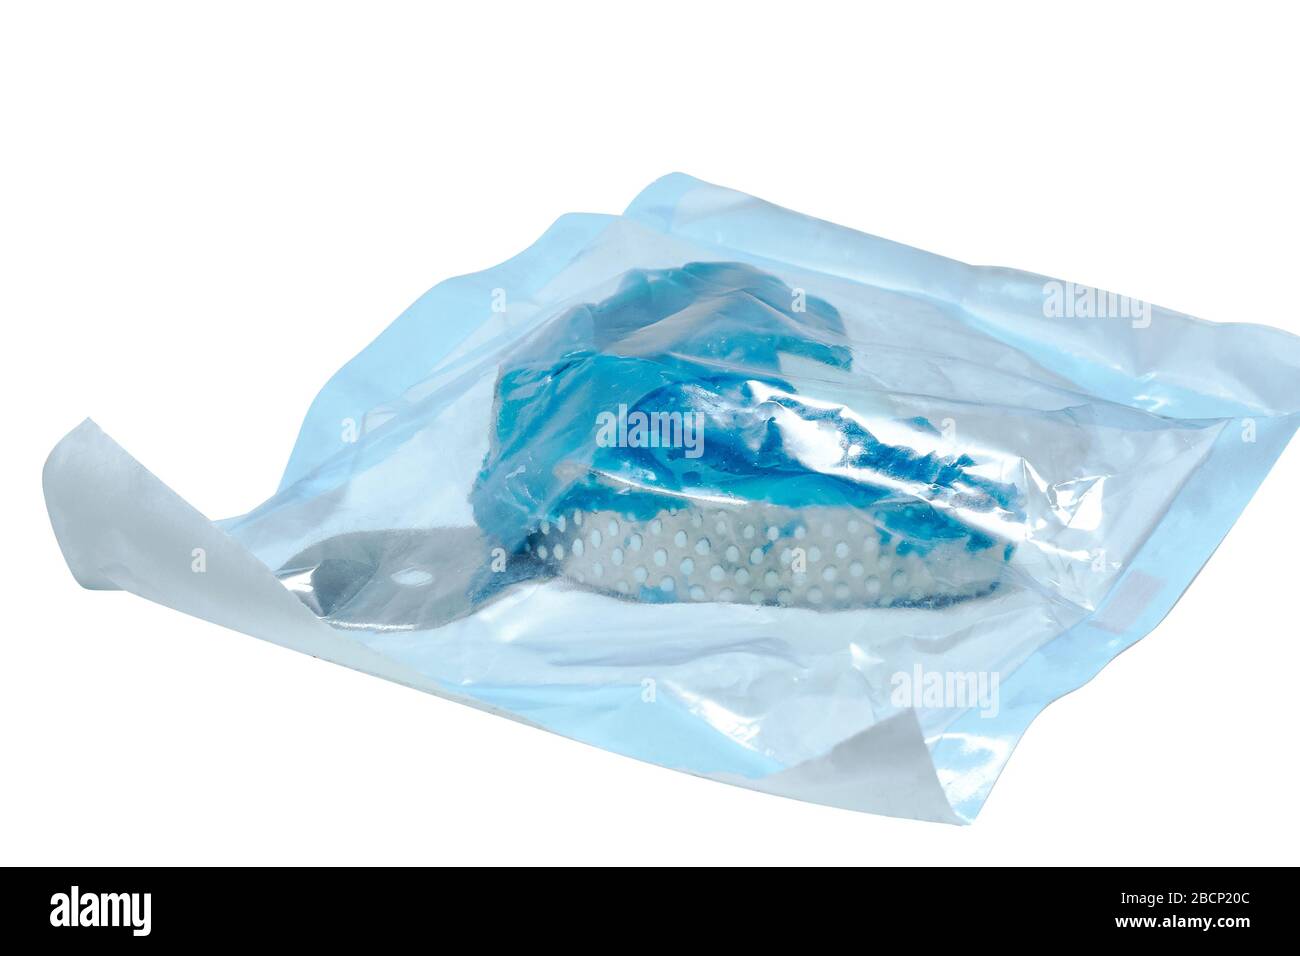 silicon dental mold in vacuum package for sterilization Stock Photo